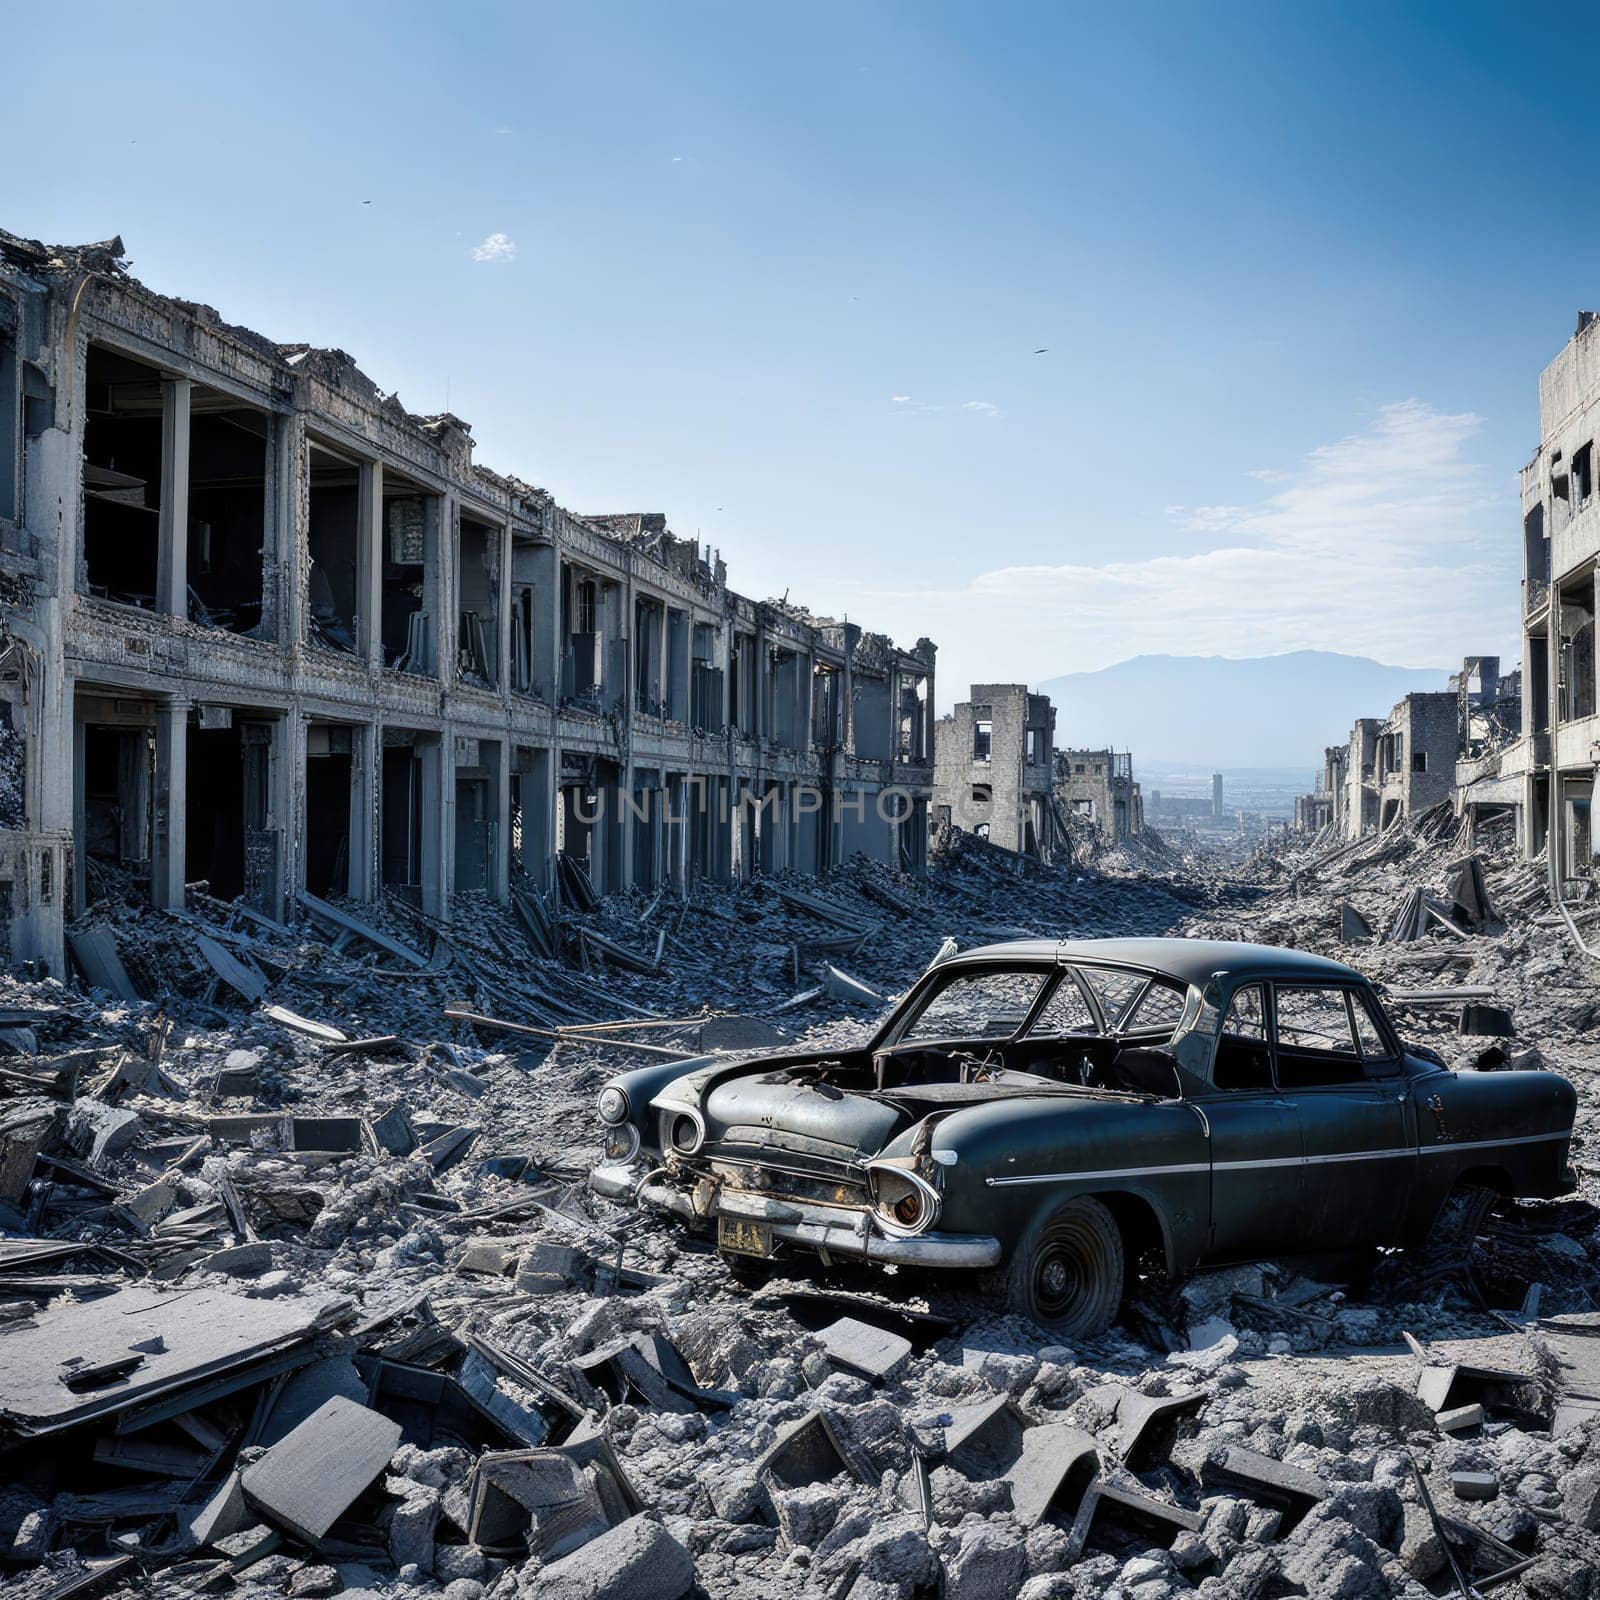 Photograph of destroyed buildings and houses due to the war. Mass destruction. Lifeless cities. Combat operations on the territory of civilians. Concrete, stones and glass shards.